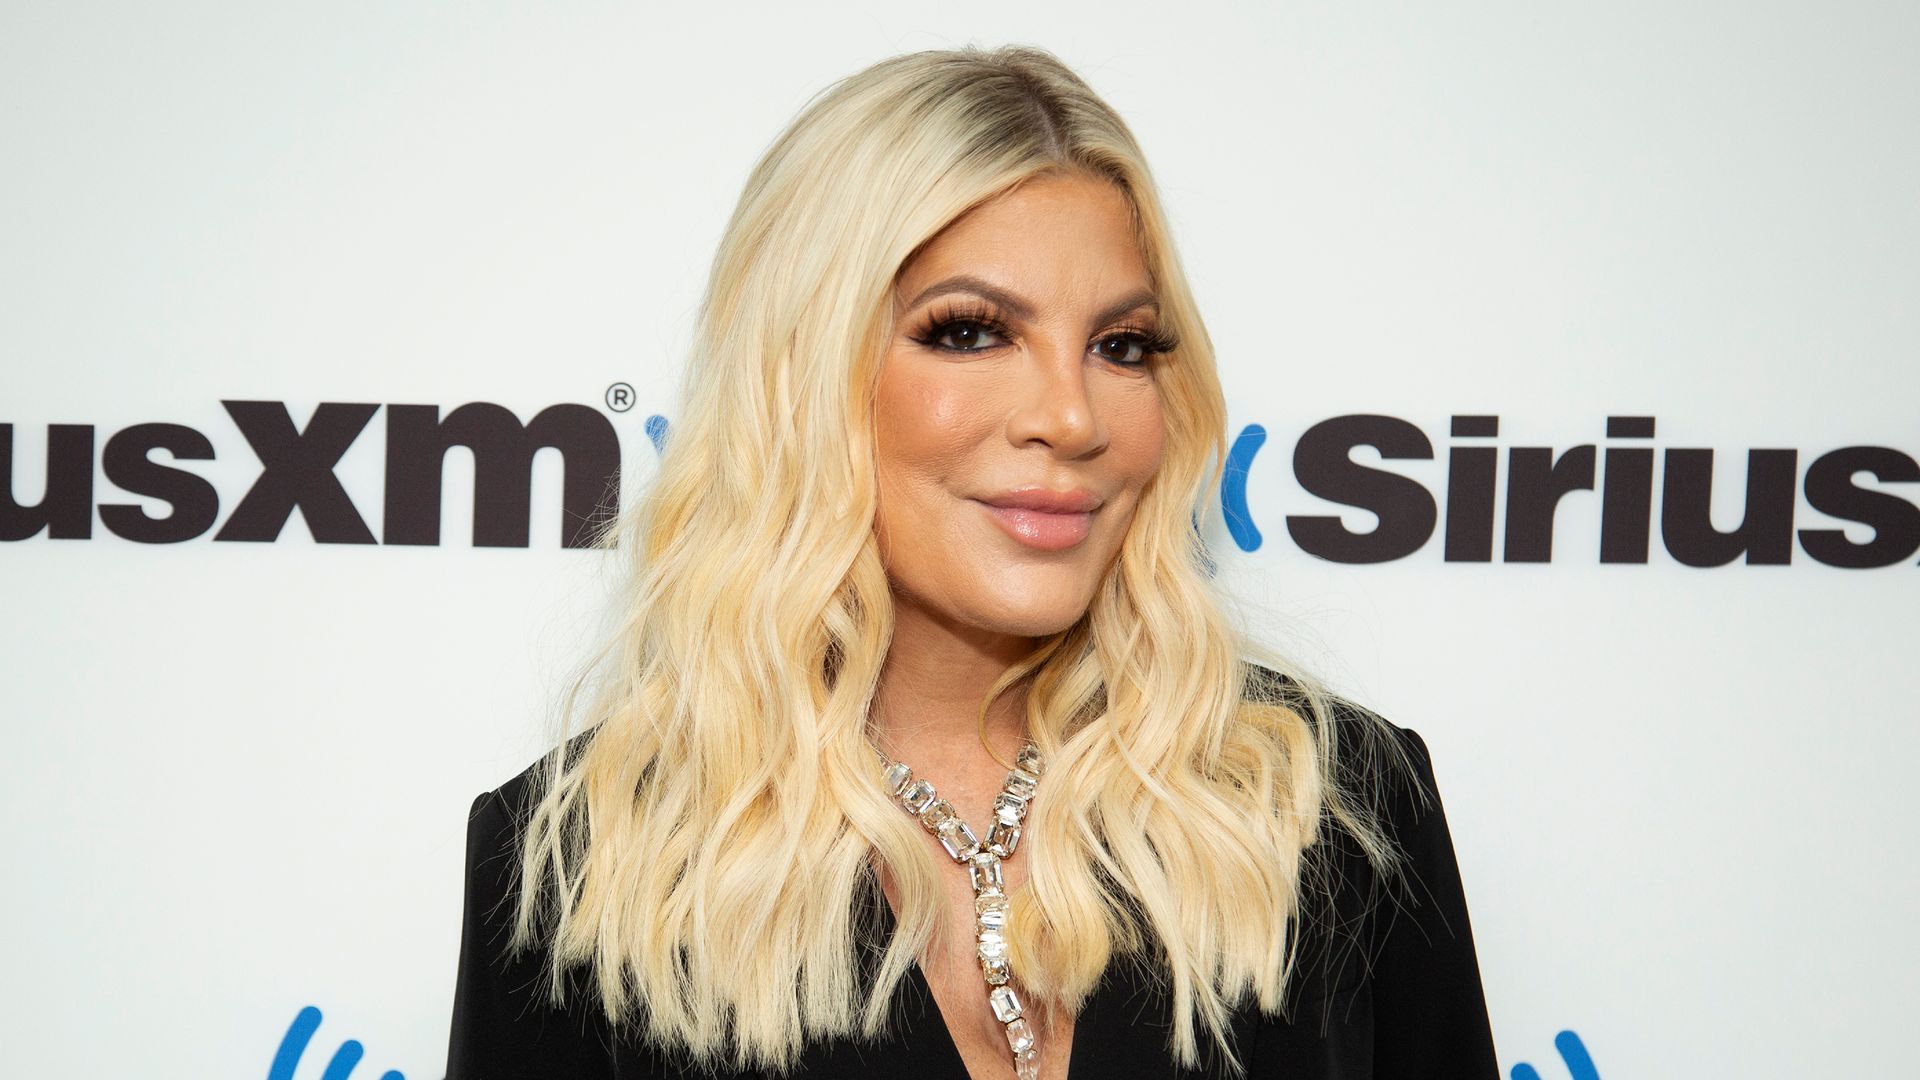 Tori Spelling's fans come to her defense as 'haters' question son's appearance — her response